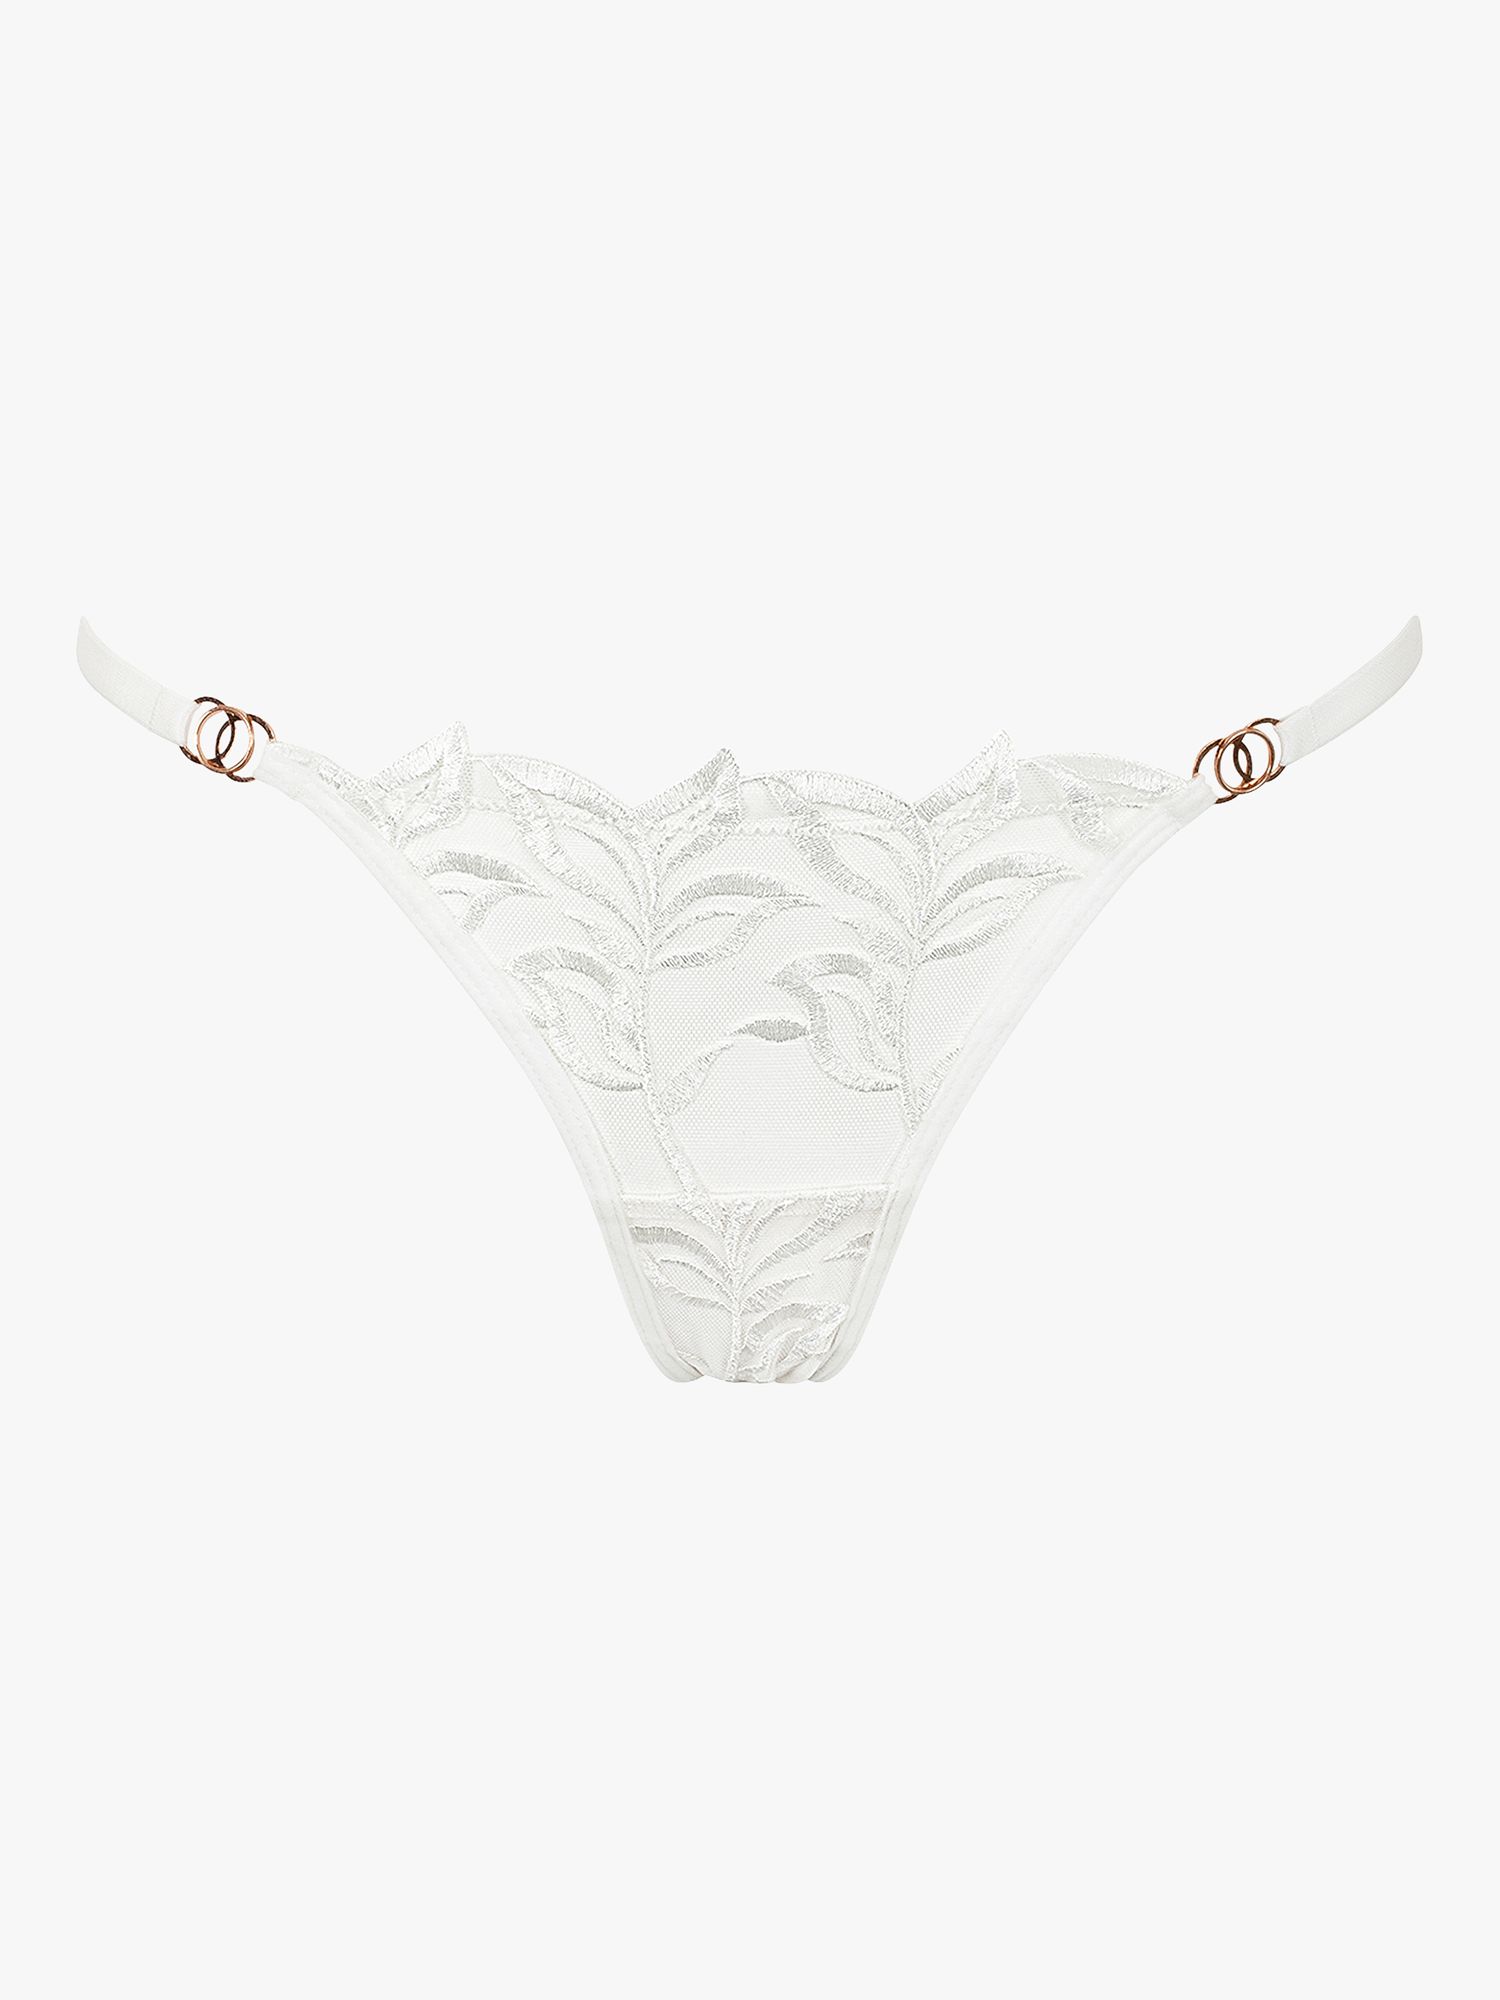 Bluebella Isadora Leaf Embroidery Thong, White, 8